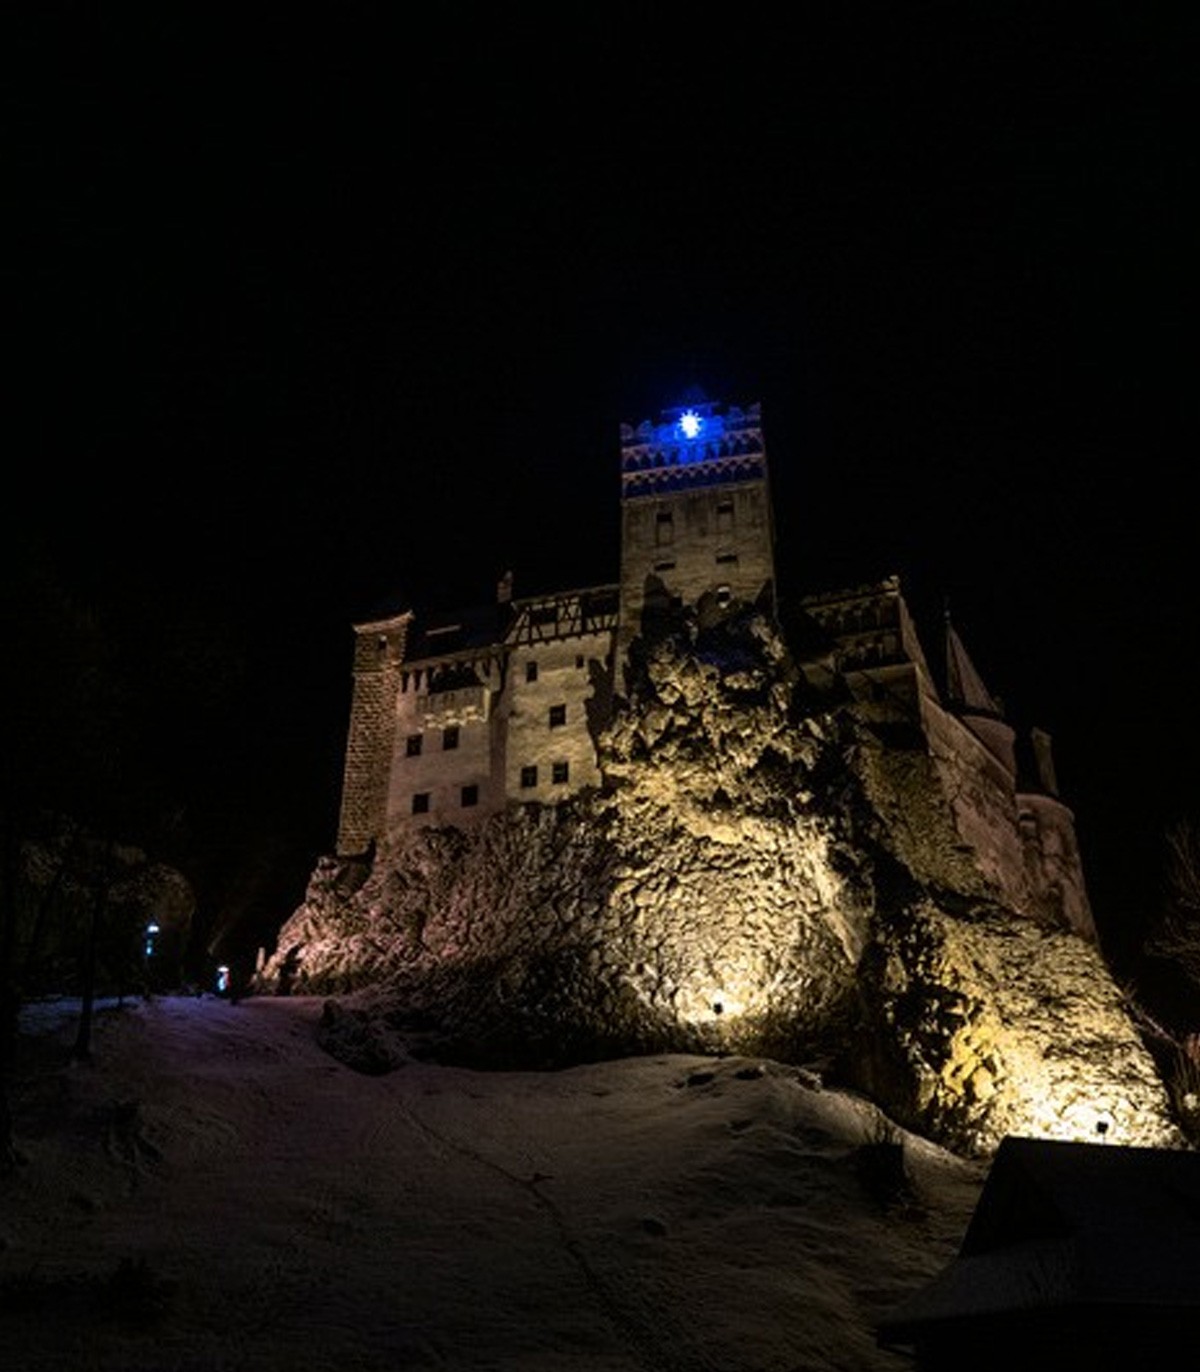 Visit Count Dracula's Castle on a guided night tour